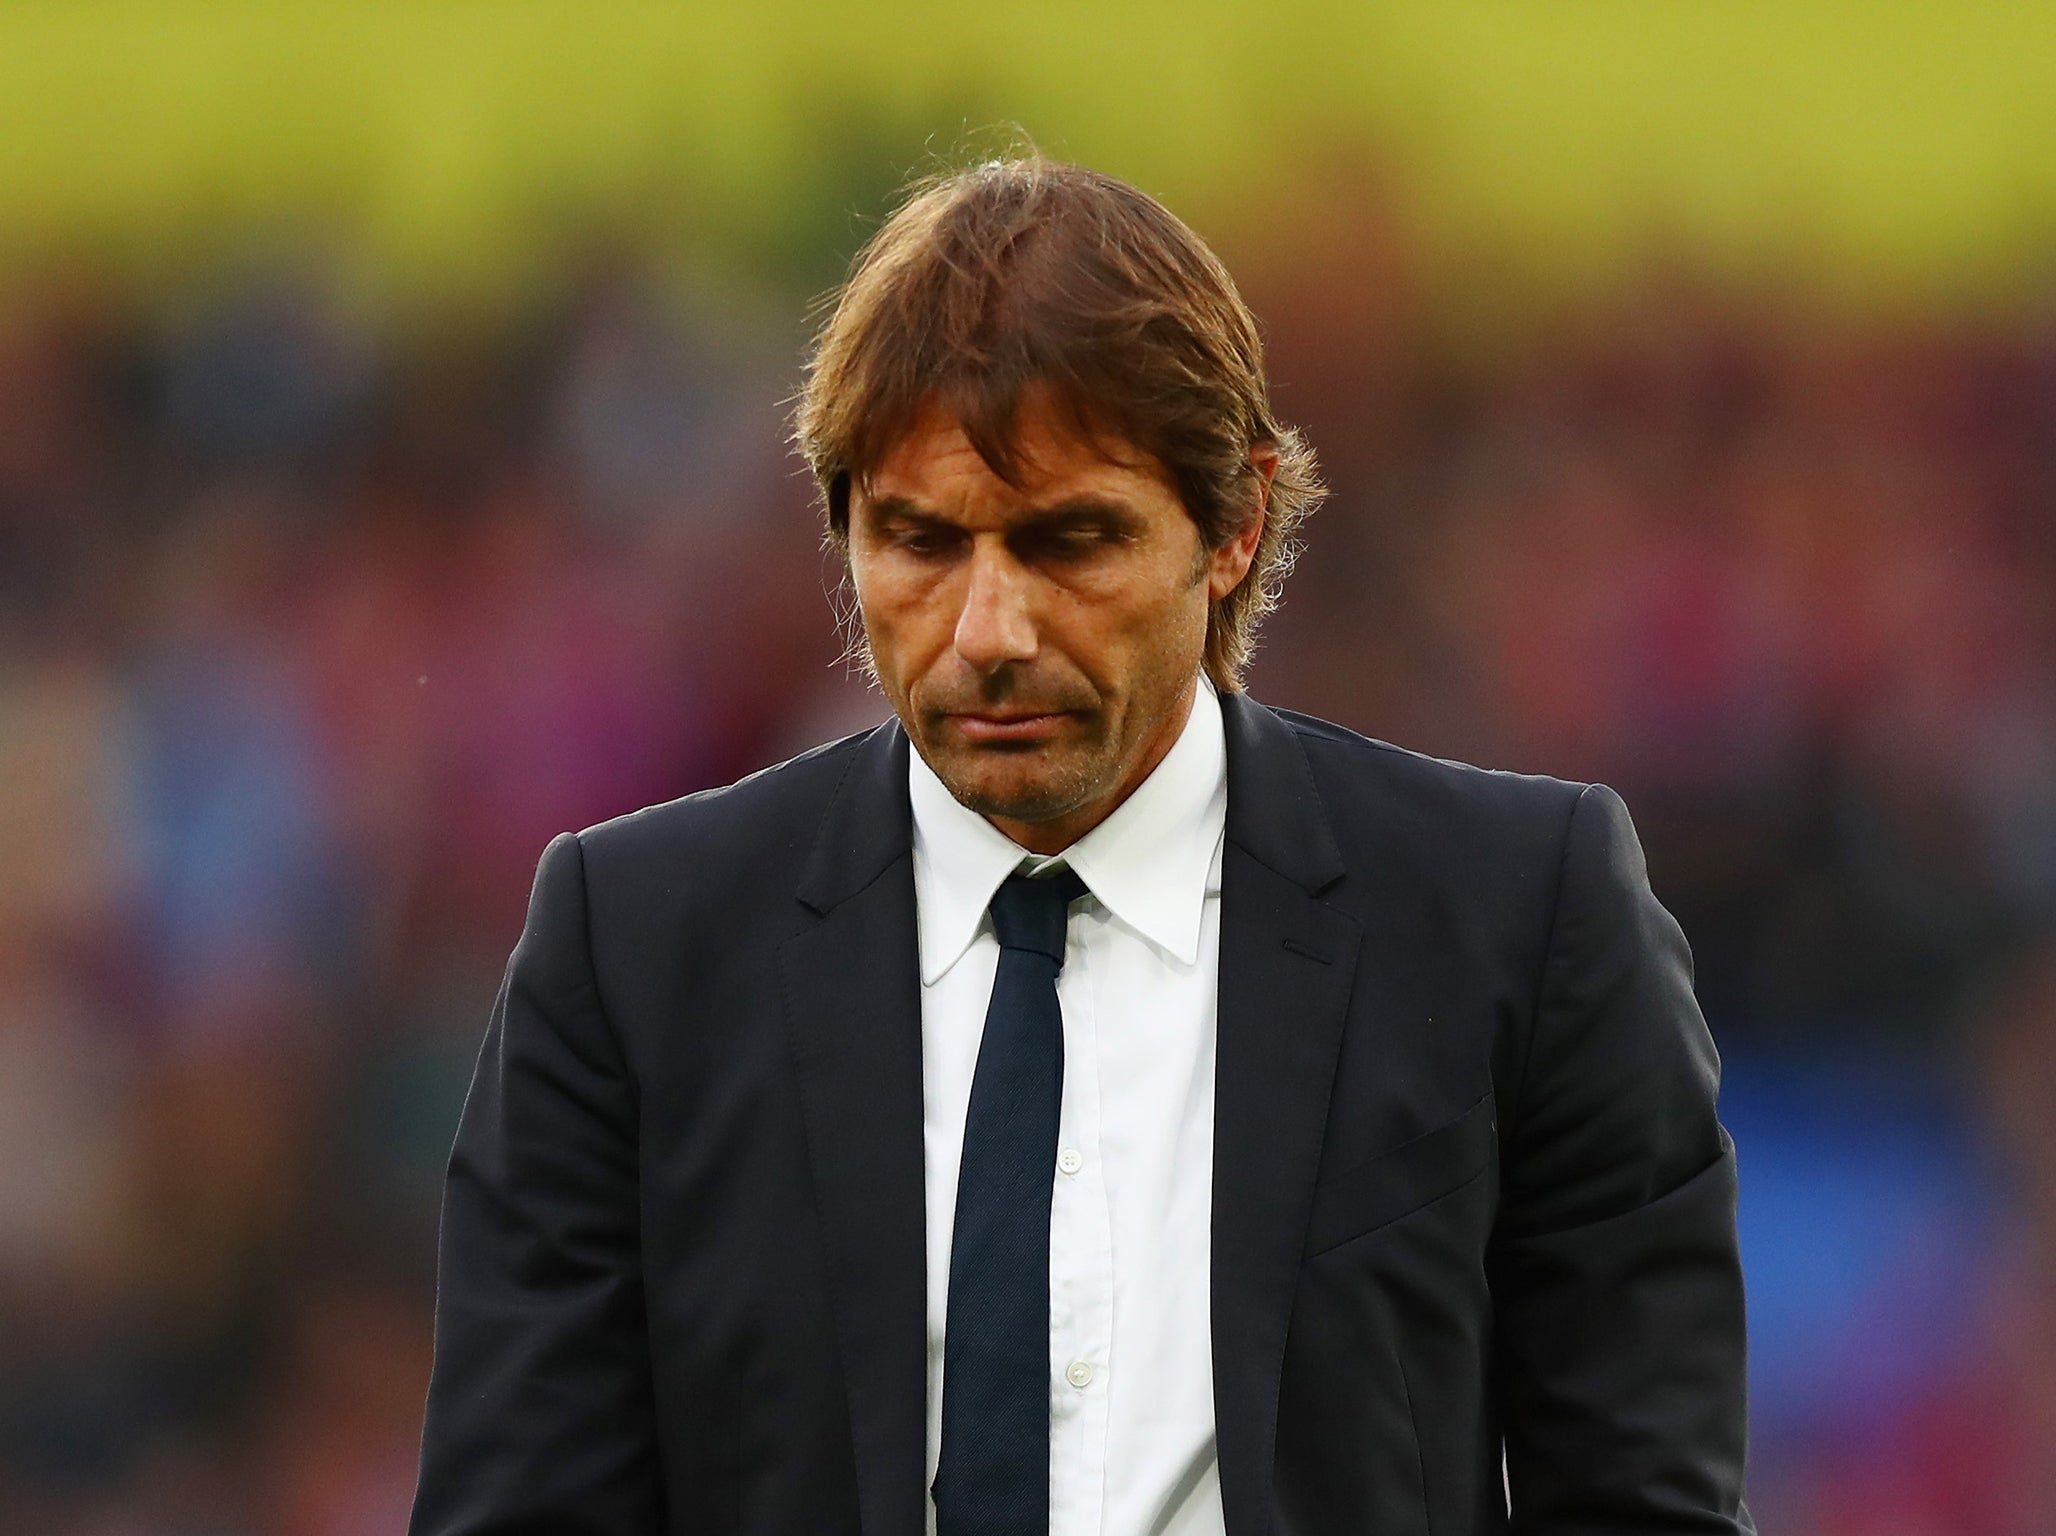 Conte was desperately disappointed with the surprise defeat